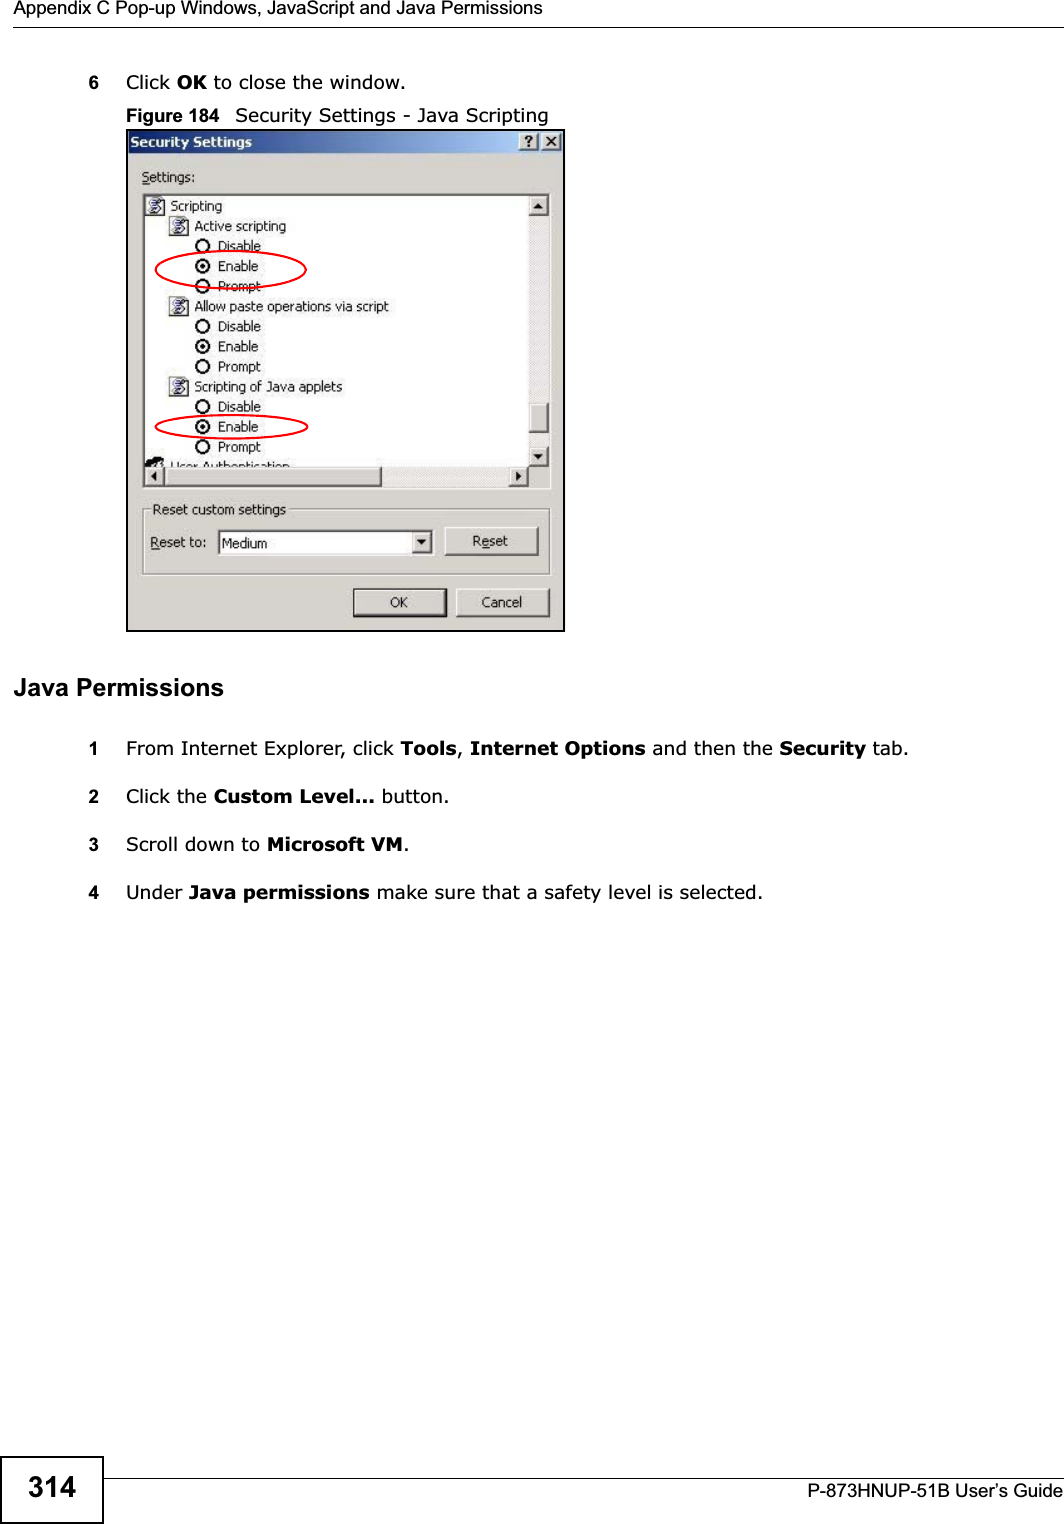 Appendix C Pop-up Windows, JavaScript and Java PermissionsP-873HNUP-51B User’s Guide3146Click OK to close the window.Figure 184   Security Settings - Java ScriptingJava Permissions1From Internet Explorer, click Tools,Internet Options and then the Security tab. 2Click the Custom Level... button. 3Scroll down to Microsoft VM.4Under Java permissions make sure that a safety level is selected.